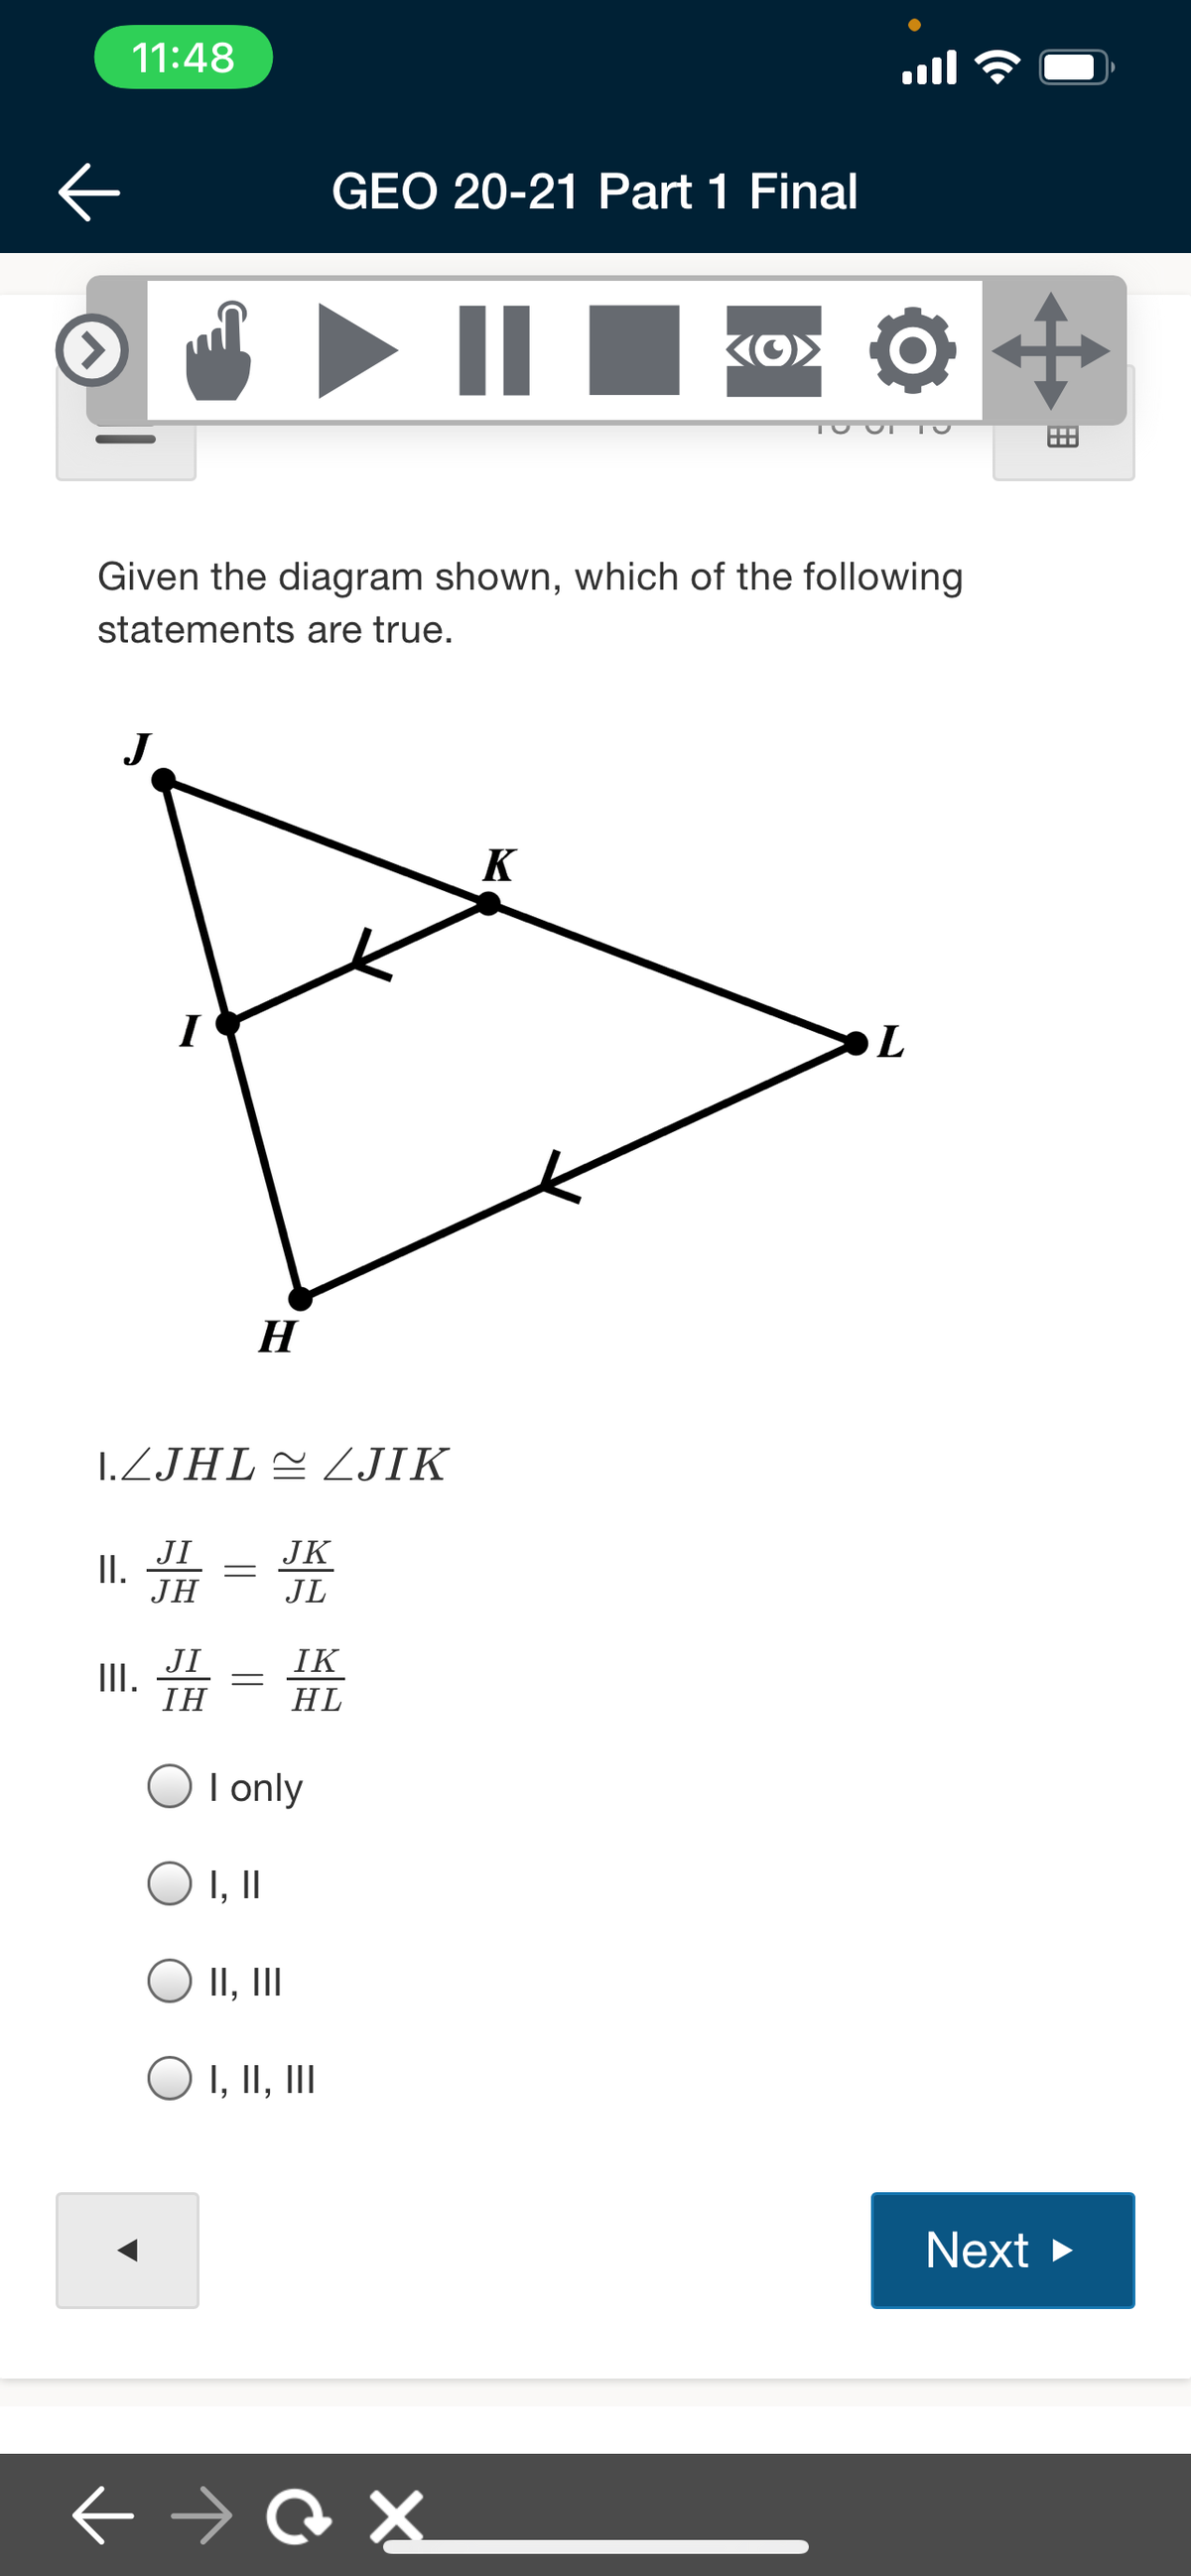 11:48
ll
GEO 20-21 Part 1 Final
...
Given the diagram shown, which of the following
statements are true.
J
K
H
1.ZJHL2 JIK
JI
II.
JH
JK
JL
JI
II.
IH
IK
HL
I only
I, I
II, II
O I, II, II
Next >
+ → Q X
